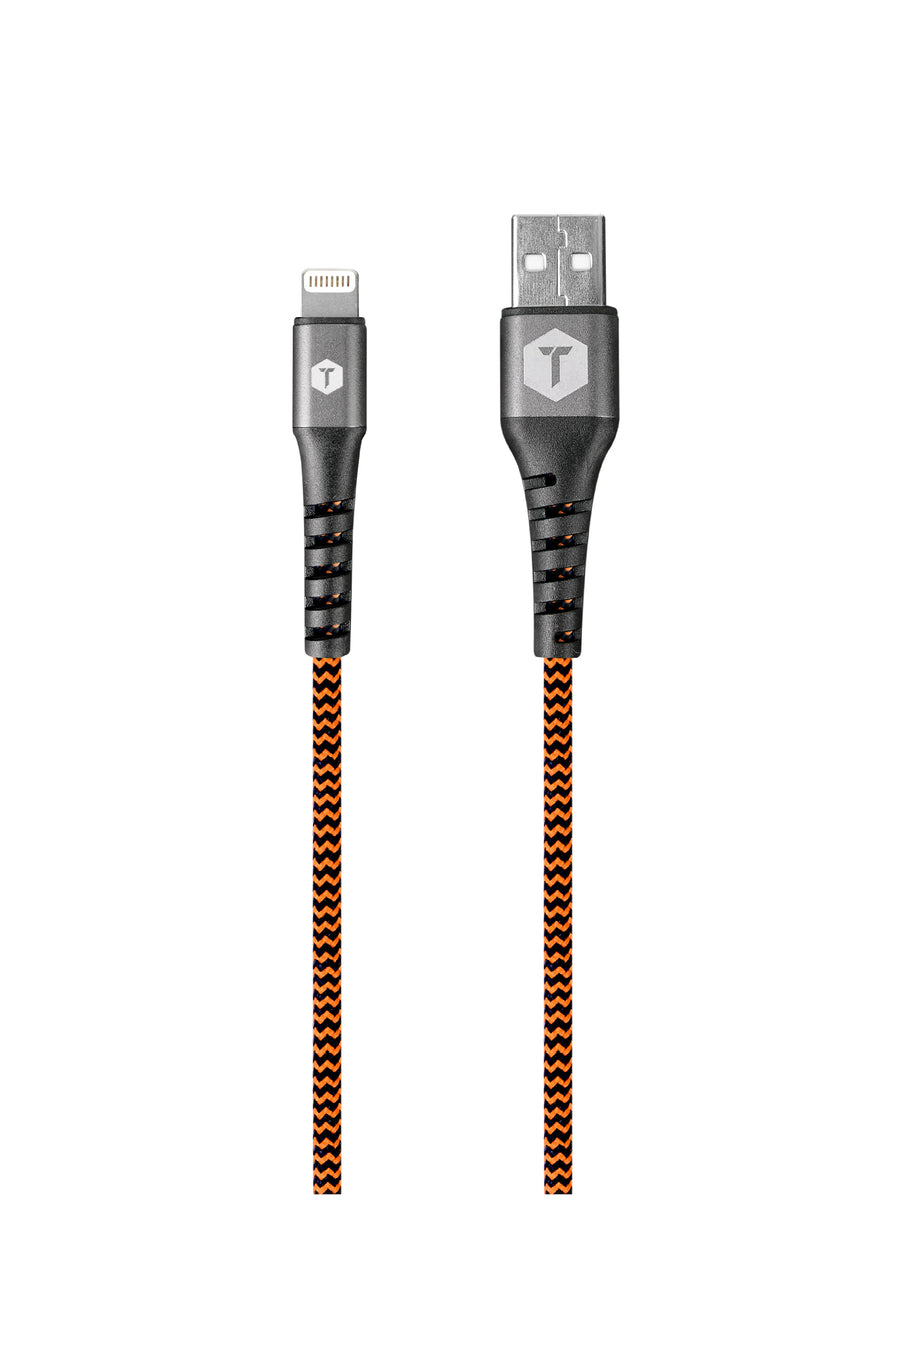 Braided 6 Ft. USB Cable with Lightning Connector (IP5)